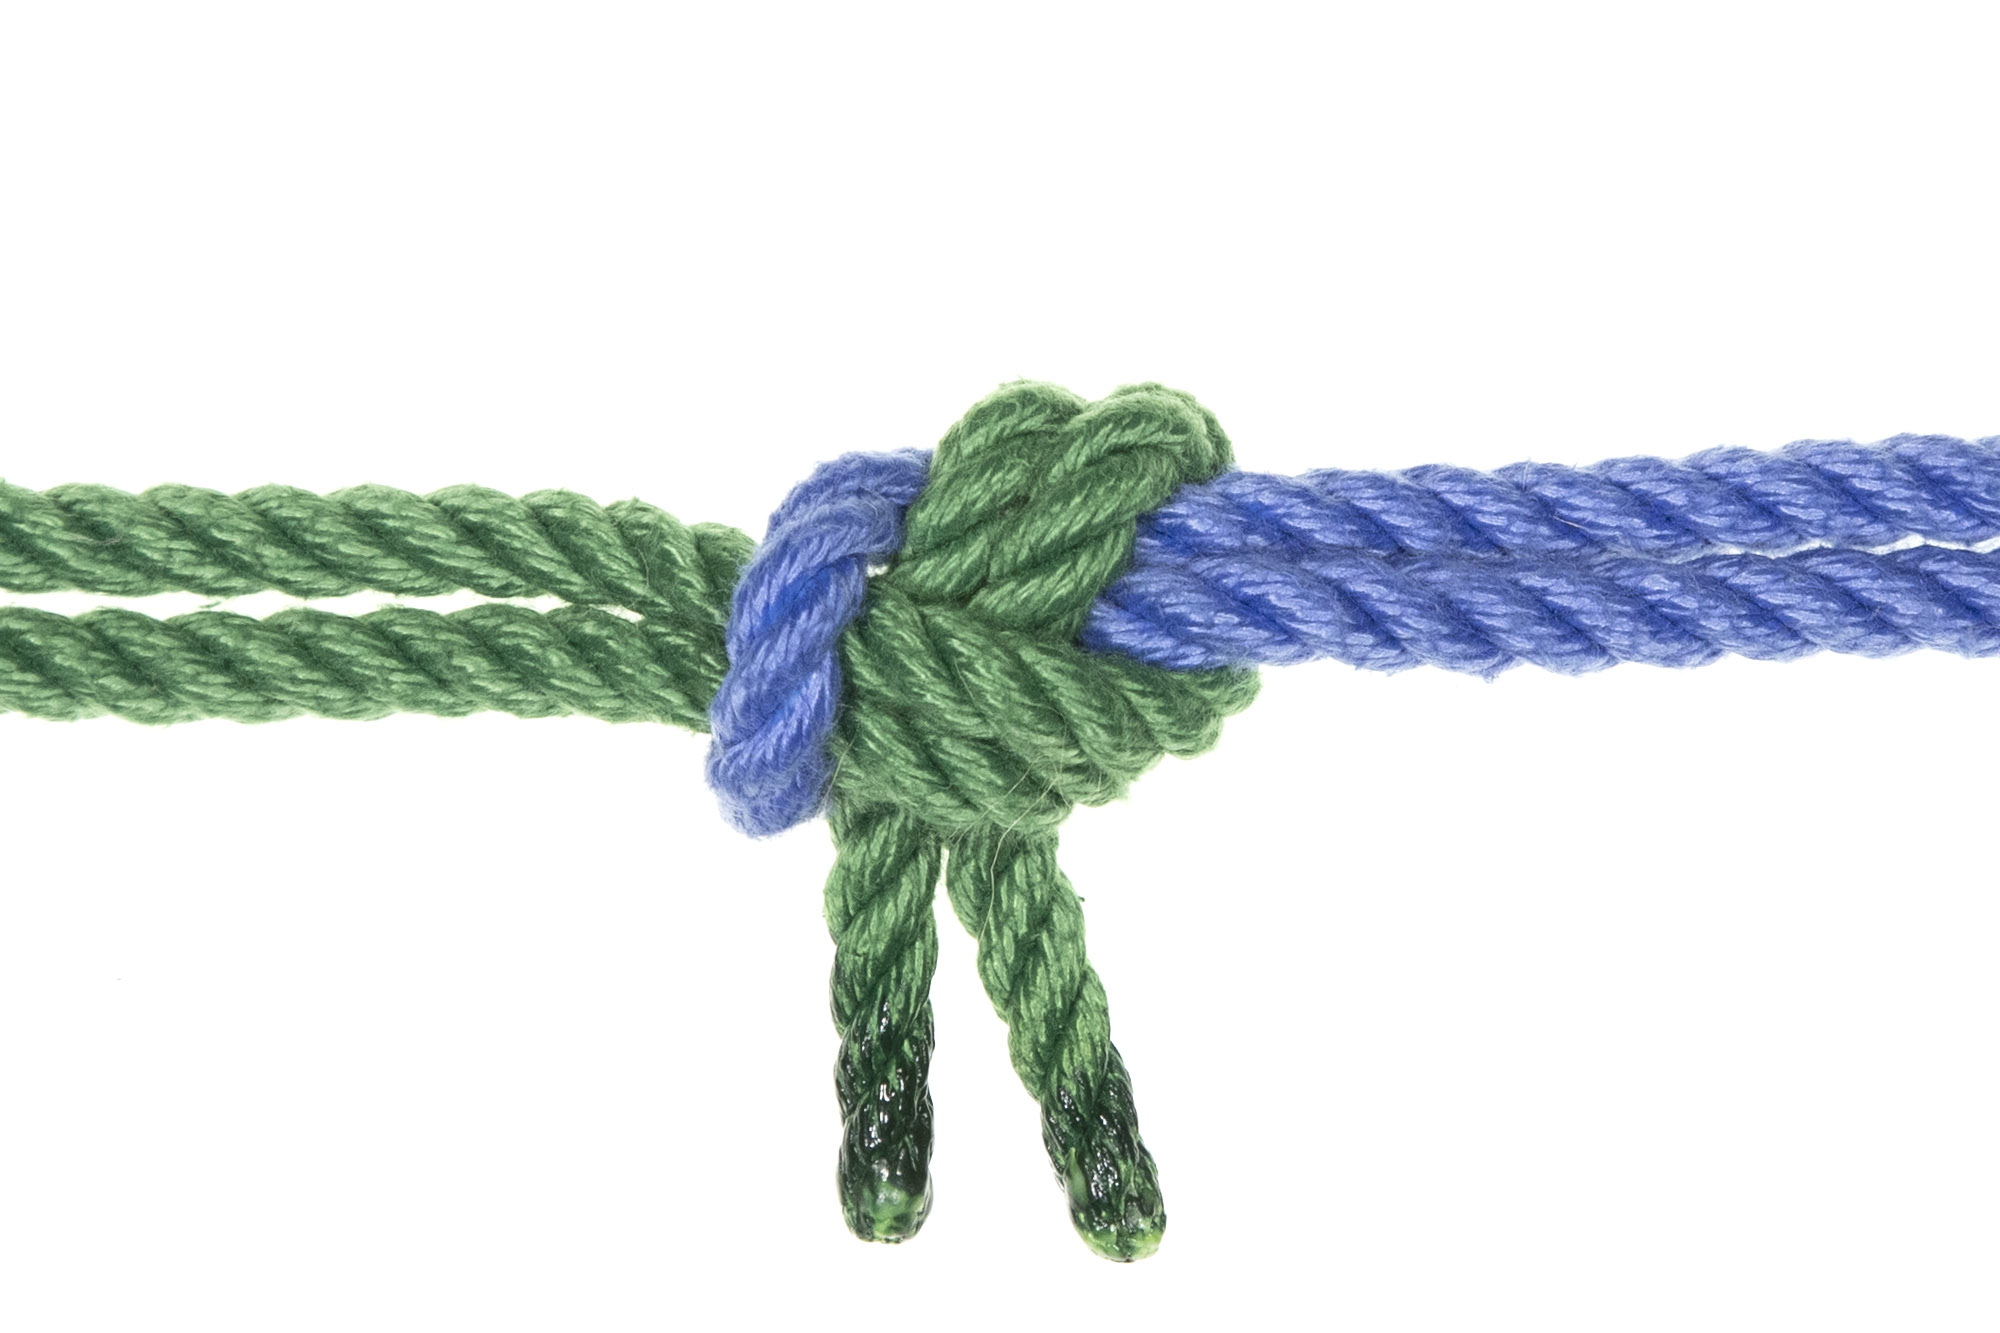 A sheet bend joins the two ends of a green rope to the bight of a blue rope. The green rope goes through the bight, wraps around the blue rope, and crosses under itself, moving toward the bottom of the image. The knot has been neatly snugged into a compact shape.